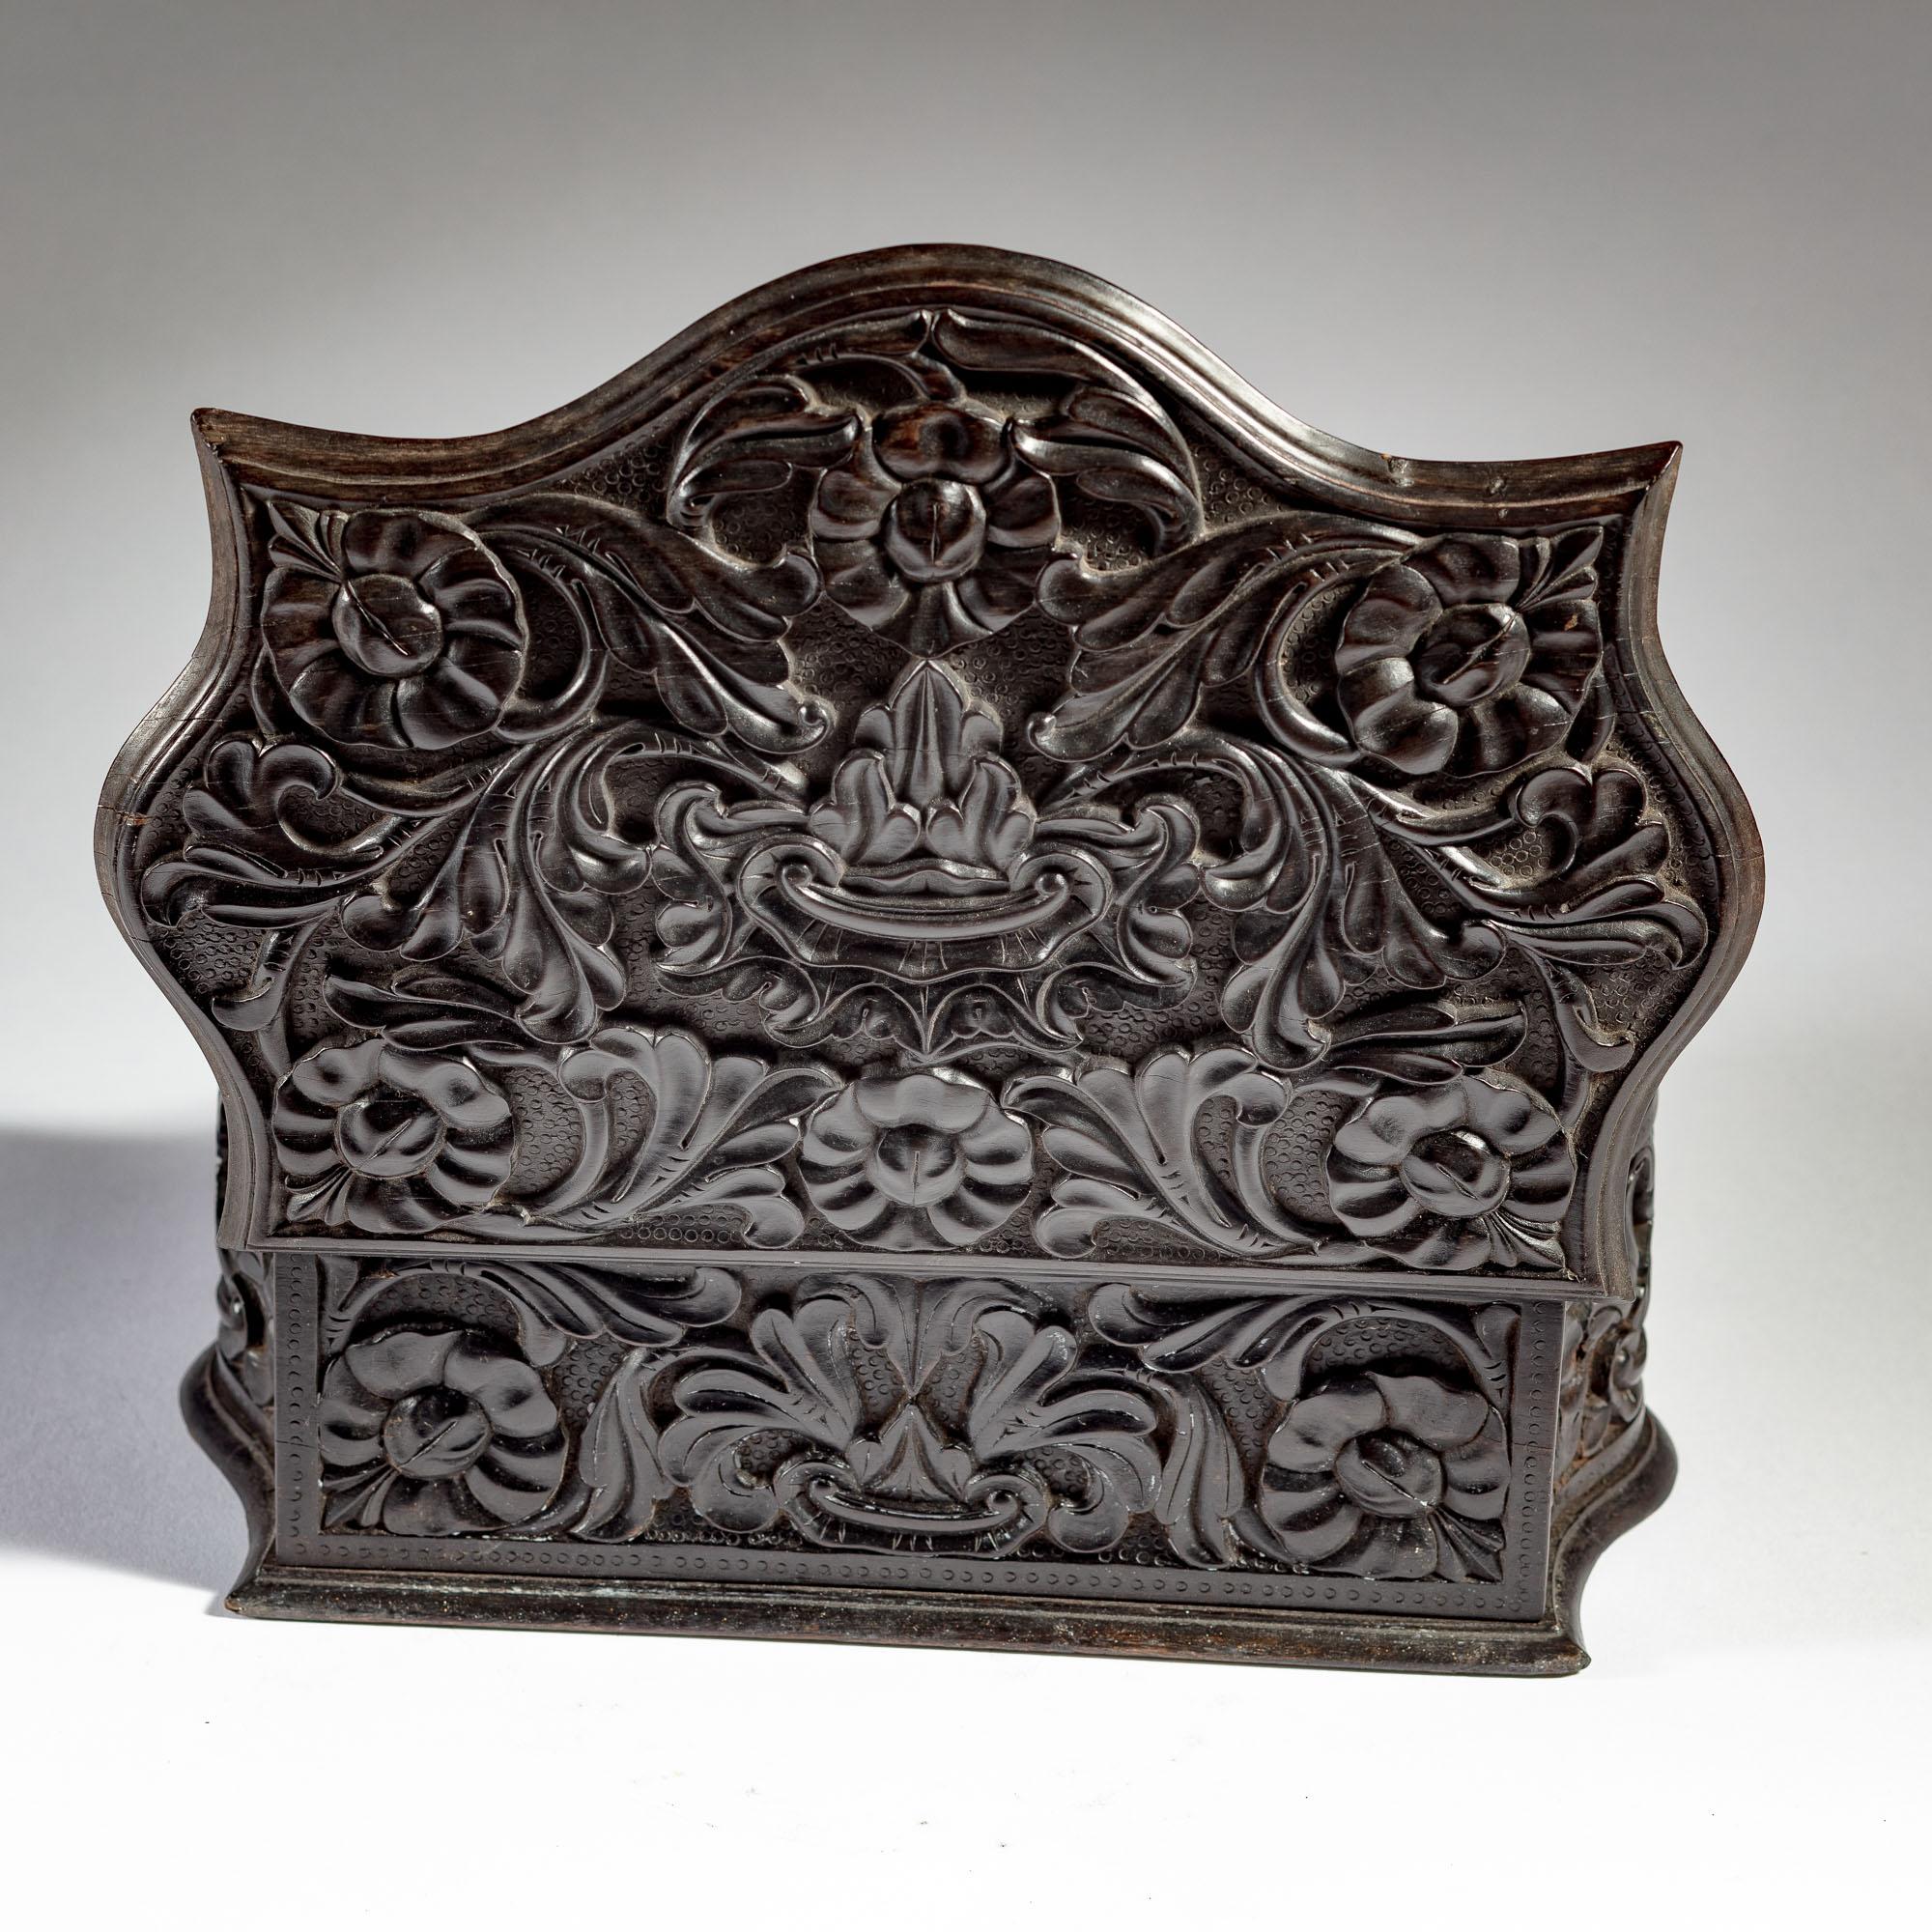 Very Unusual Mid 19th Century Ceylonese Carved Ebony Workbox In Good Condition In London, by appointment only